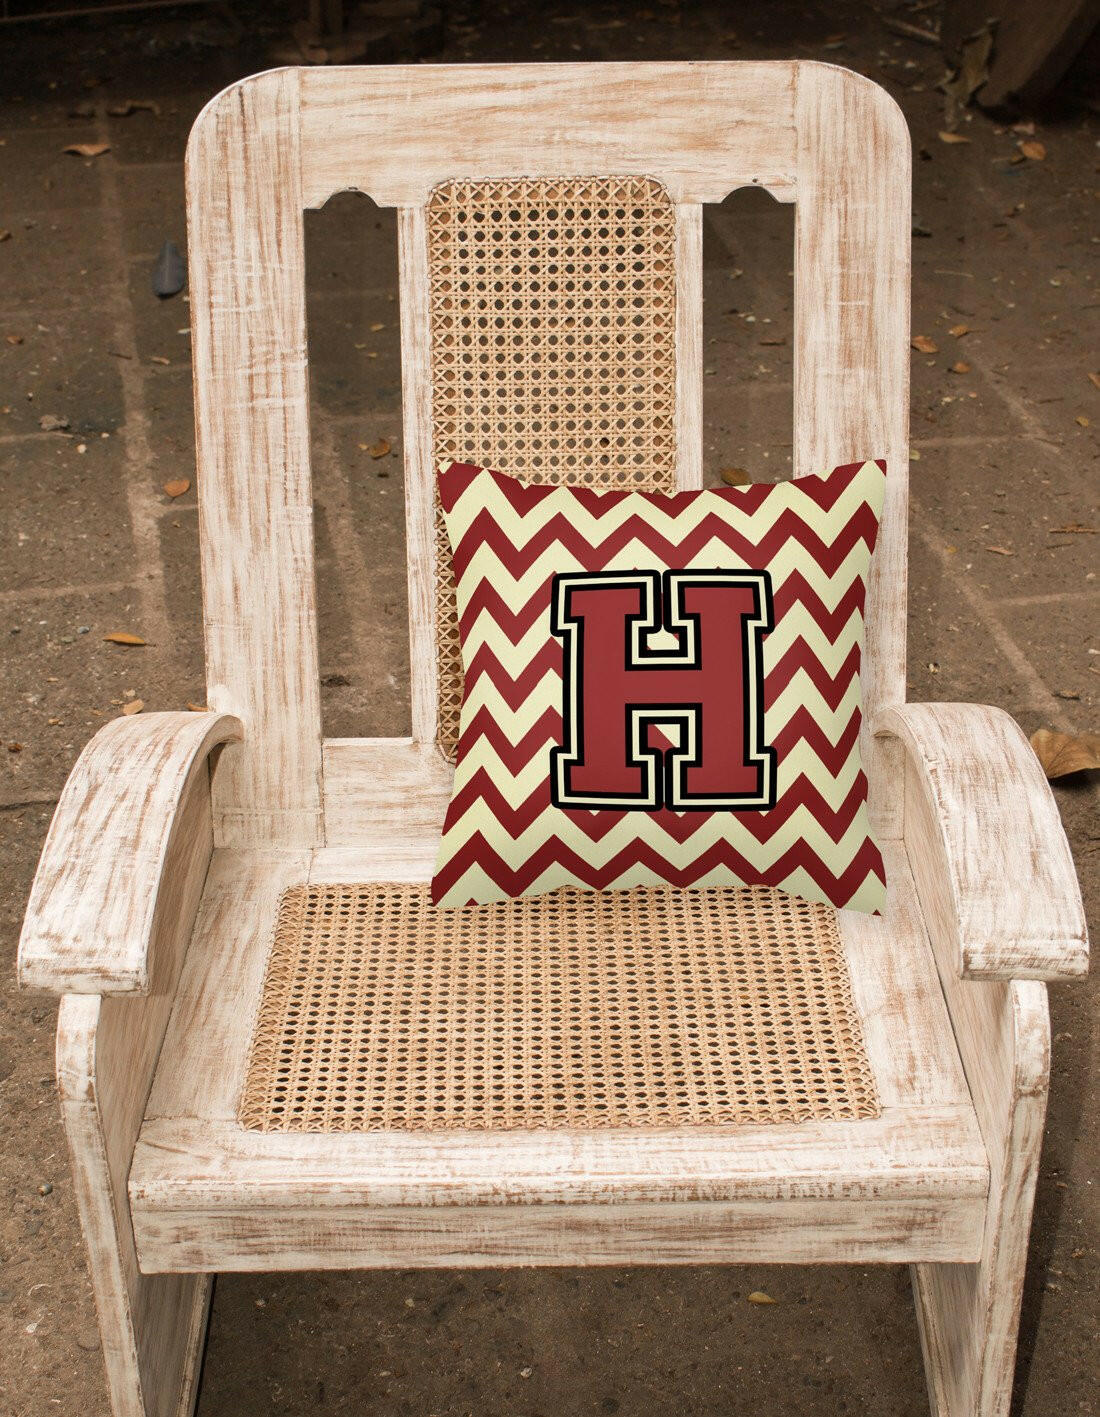 Letter H Chevron Maroon and Gold Fabric Decorative Pillow CJ1061-HPW1414 by Caroline's Treasures